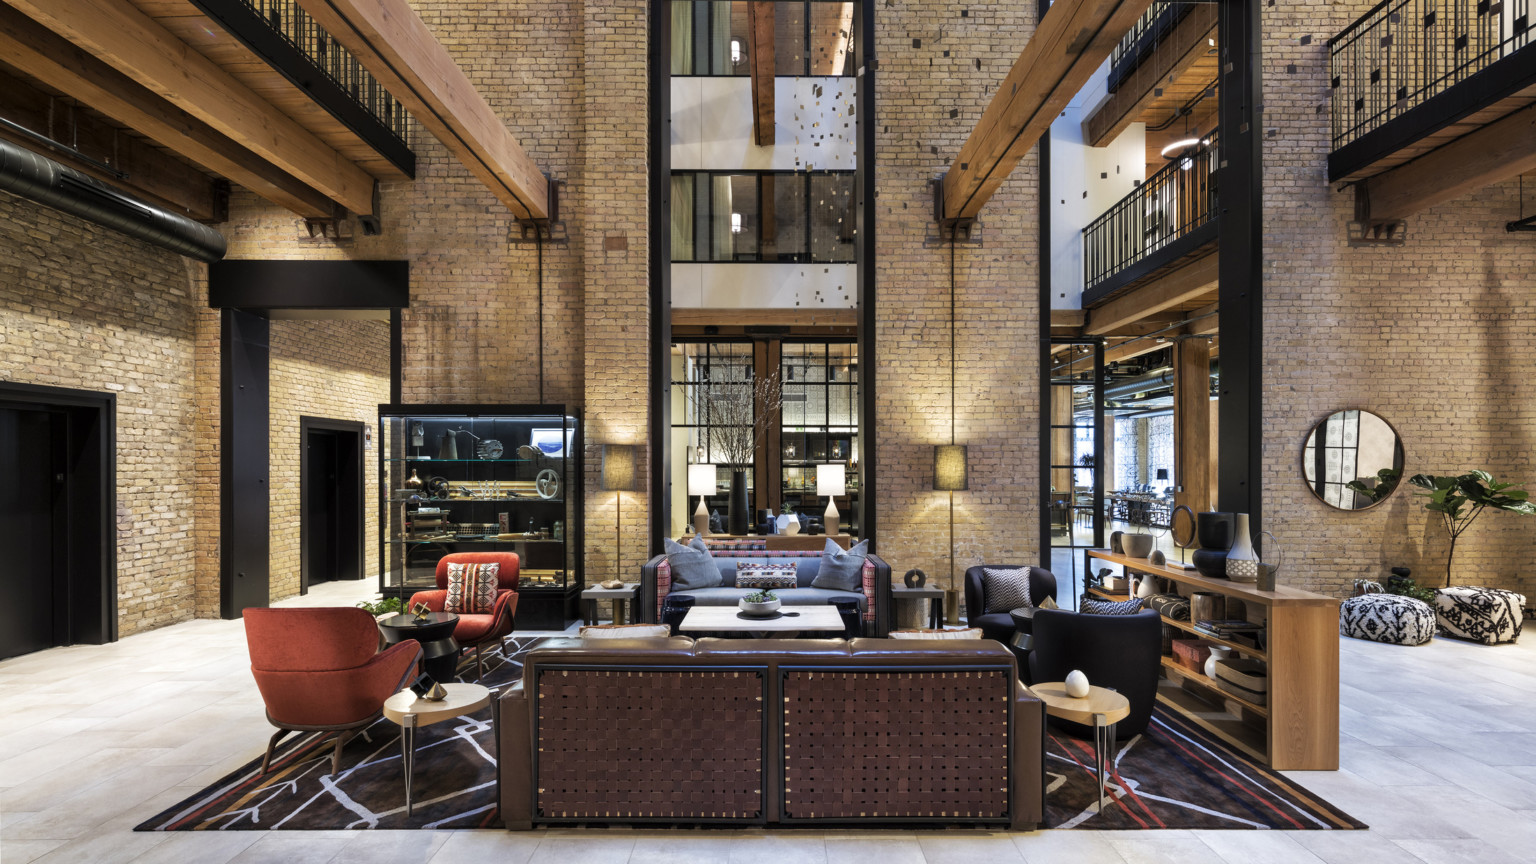 Interior atrium with exposed brick. Seating area at center and wood beams overhead. 2 walkways on sides above with metal rail